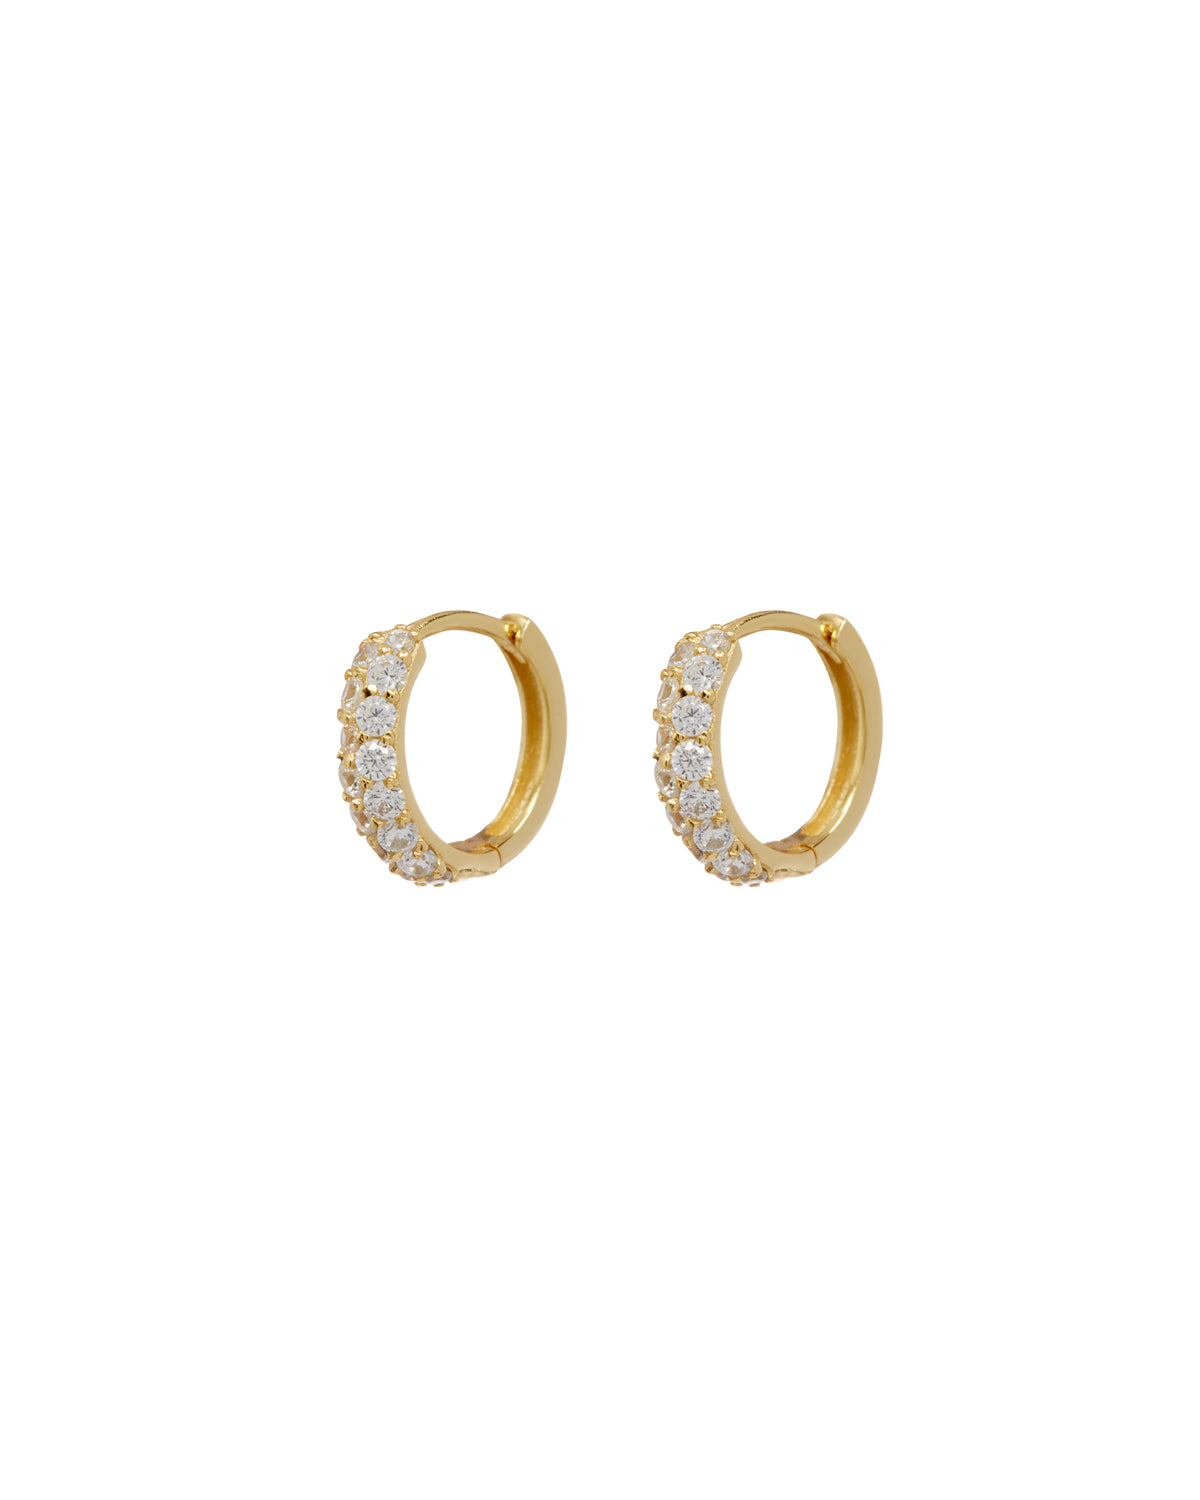 Luv Aj Baby Pave Huggie Hoop Earrings in CZ and Polished 14k Antique Gold Plated